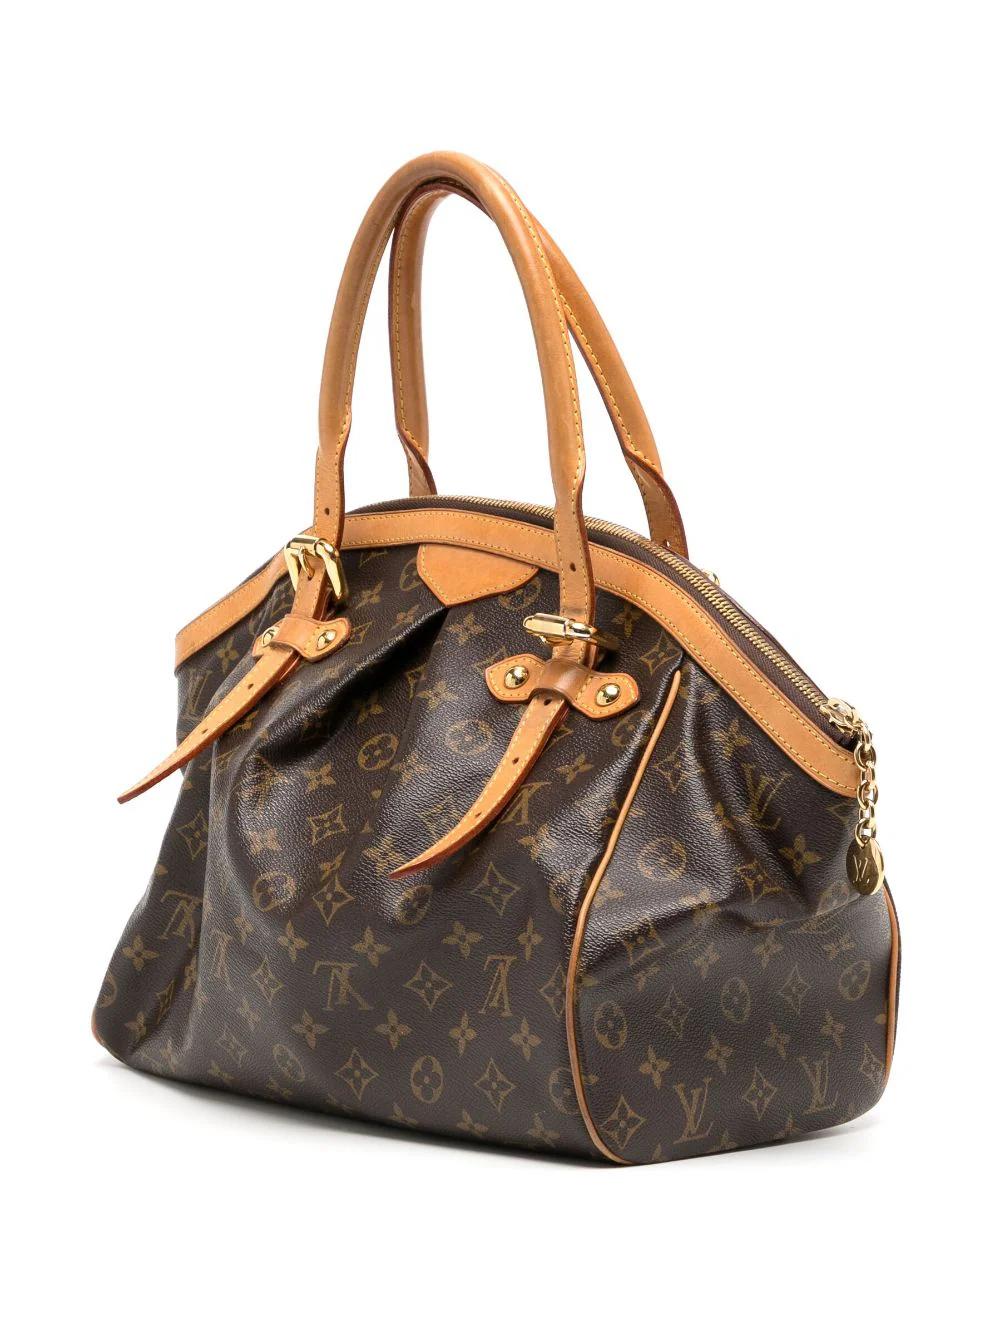 Crafted in the iconic monogram canvas, the Louis Vuitton Tivoli GM shoulder bag is a timeless classic. Opens with a gold tone zipper LV pullon top and is lined in brown canvas with two open pockets against the back and one open pocket against the